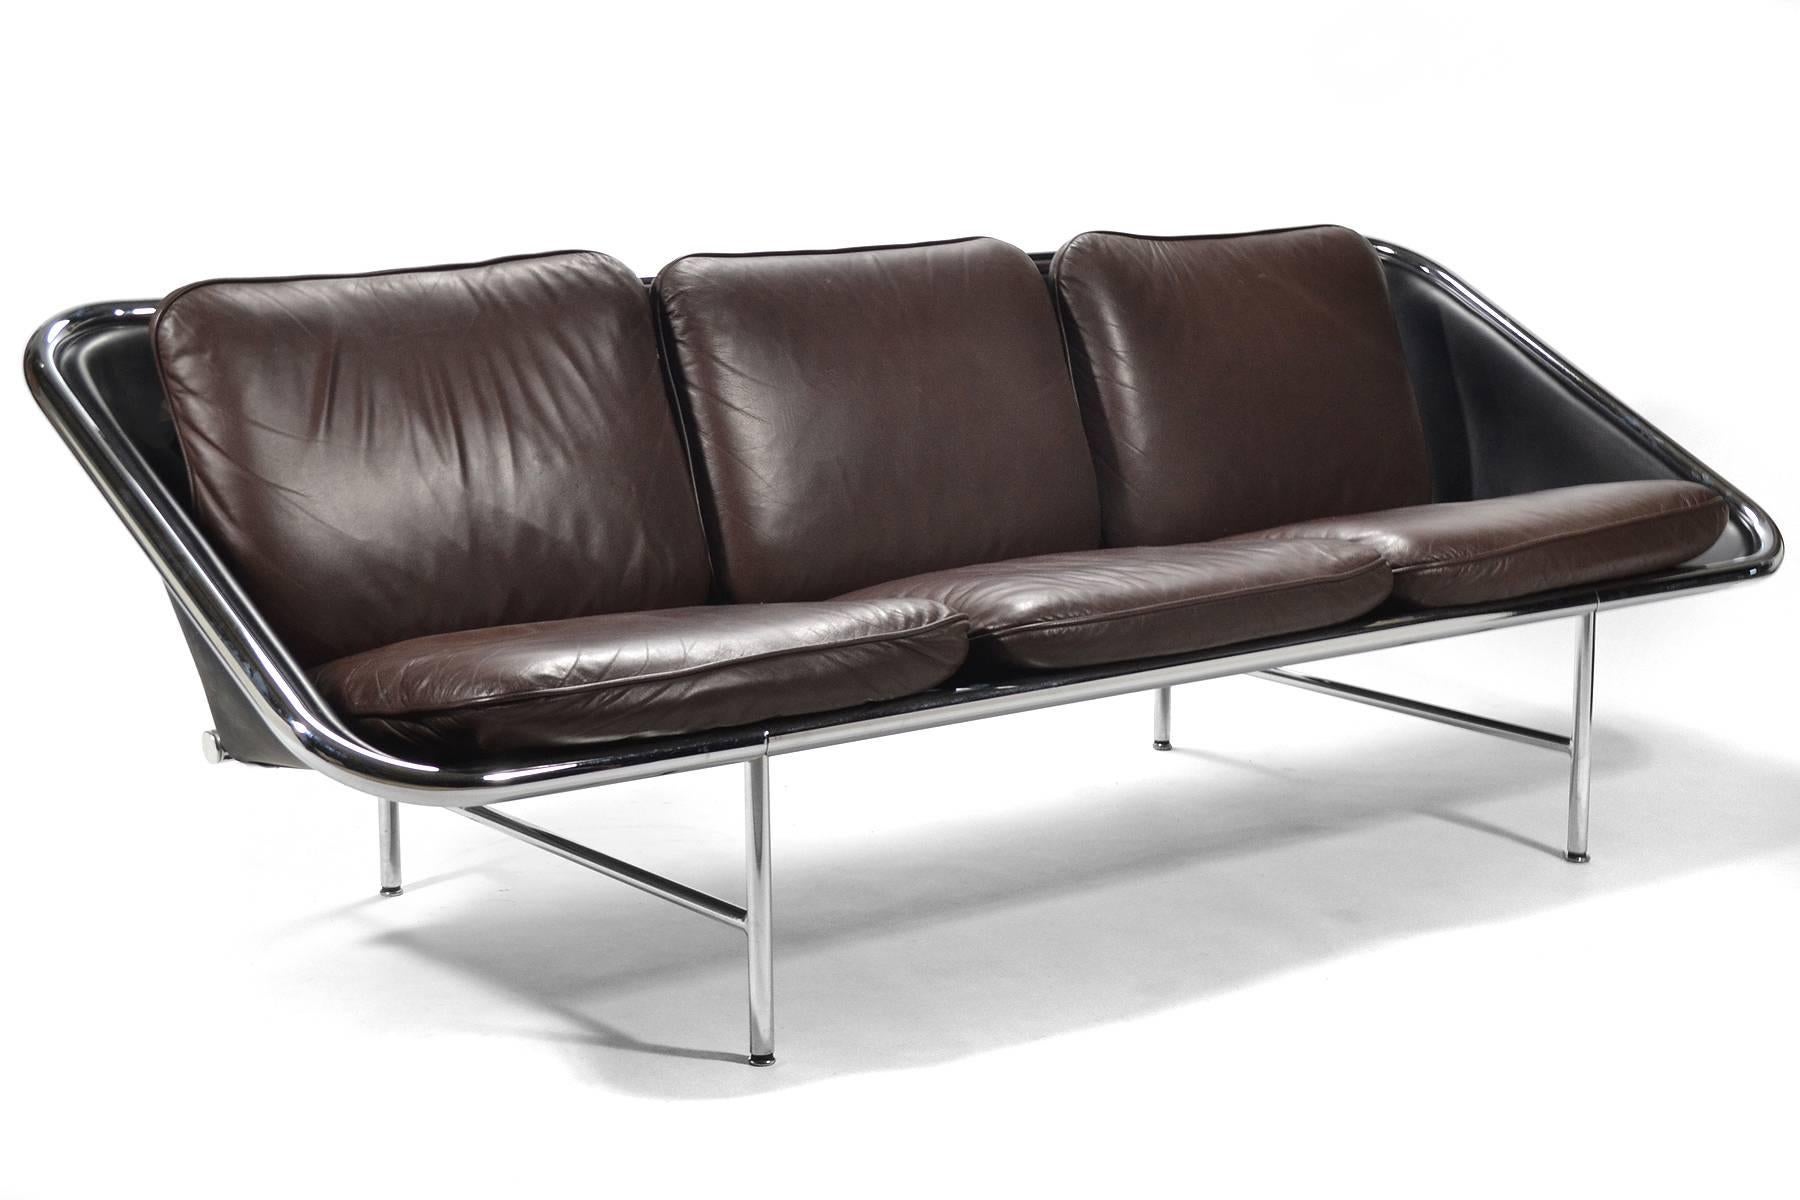 Designed in 1963 by John Svezia, Ronal Beckman and Irving Harper for George Nelson and Assoc. the Sling Sofa is an innovative design which uses a chrome-plated tubular steel frame, thick leather, neoprene and reinforced rubber to suspend the seat